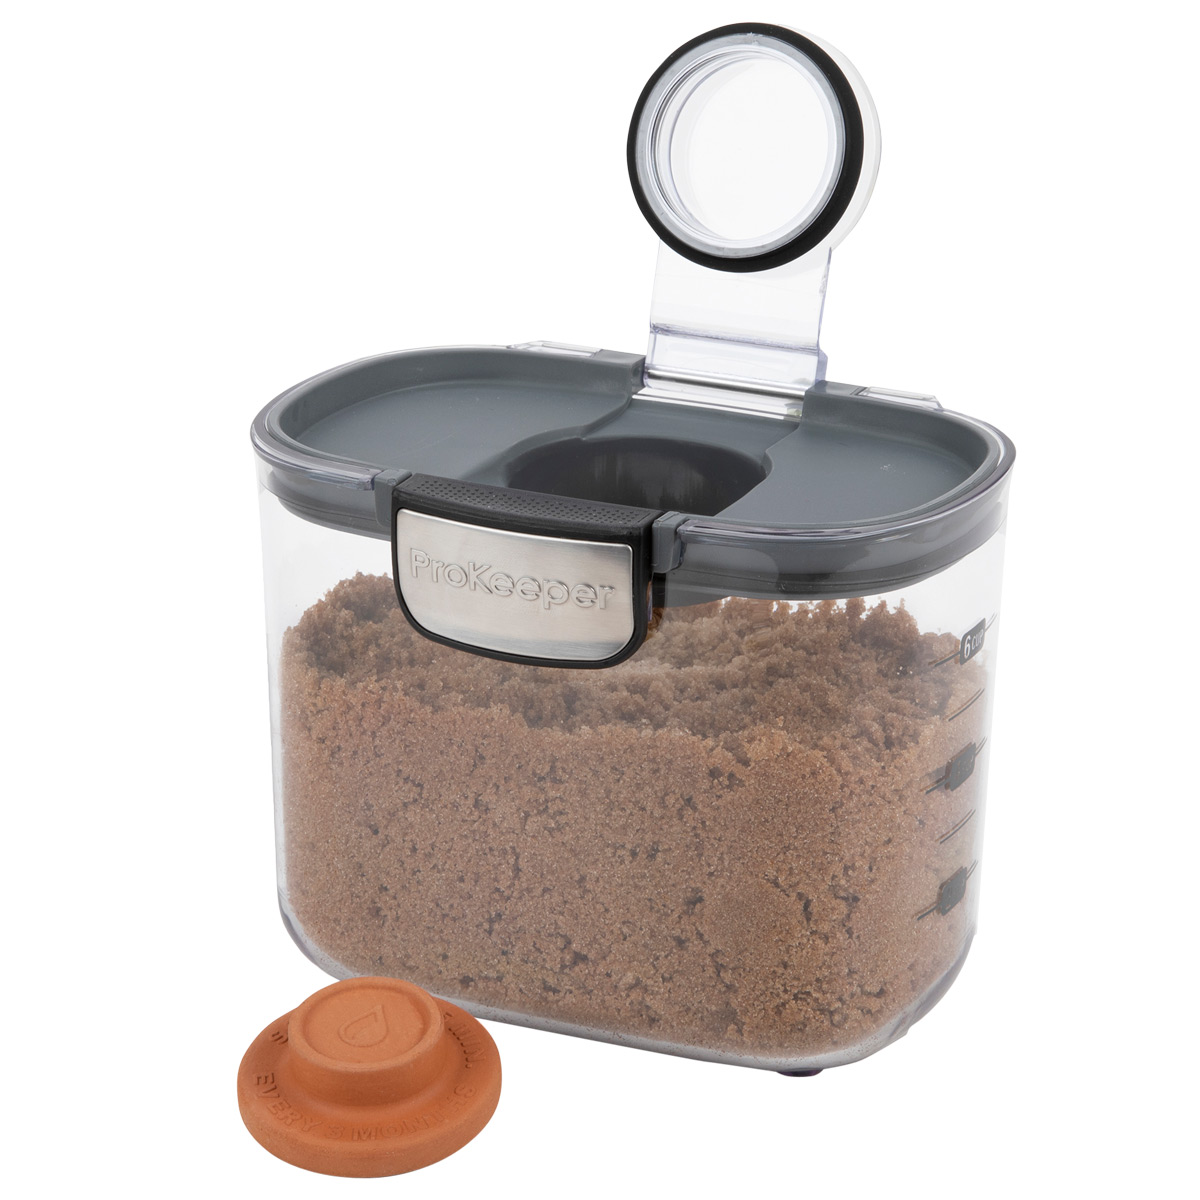 https://www.containerstore.com/catalogimages/403423/10083497-PKS-Brown-Sugar-Container-V.jpg